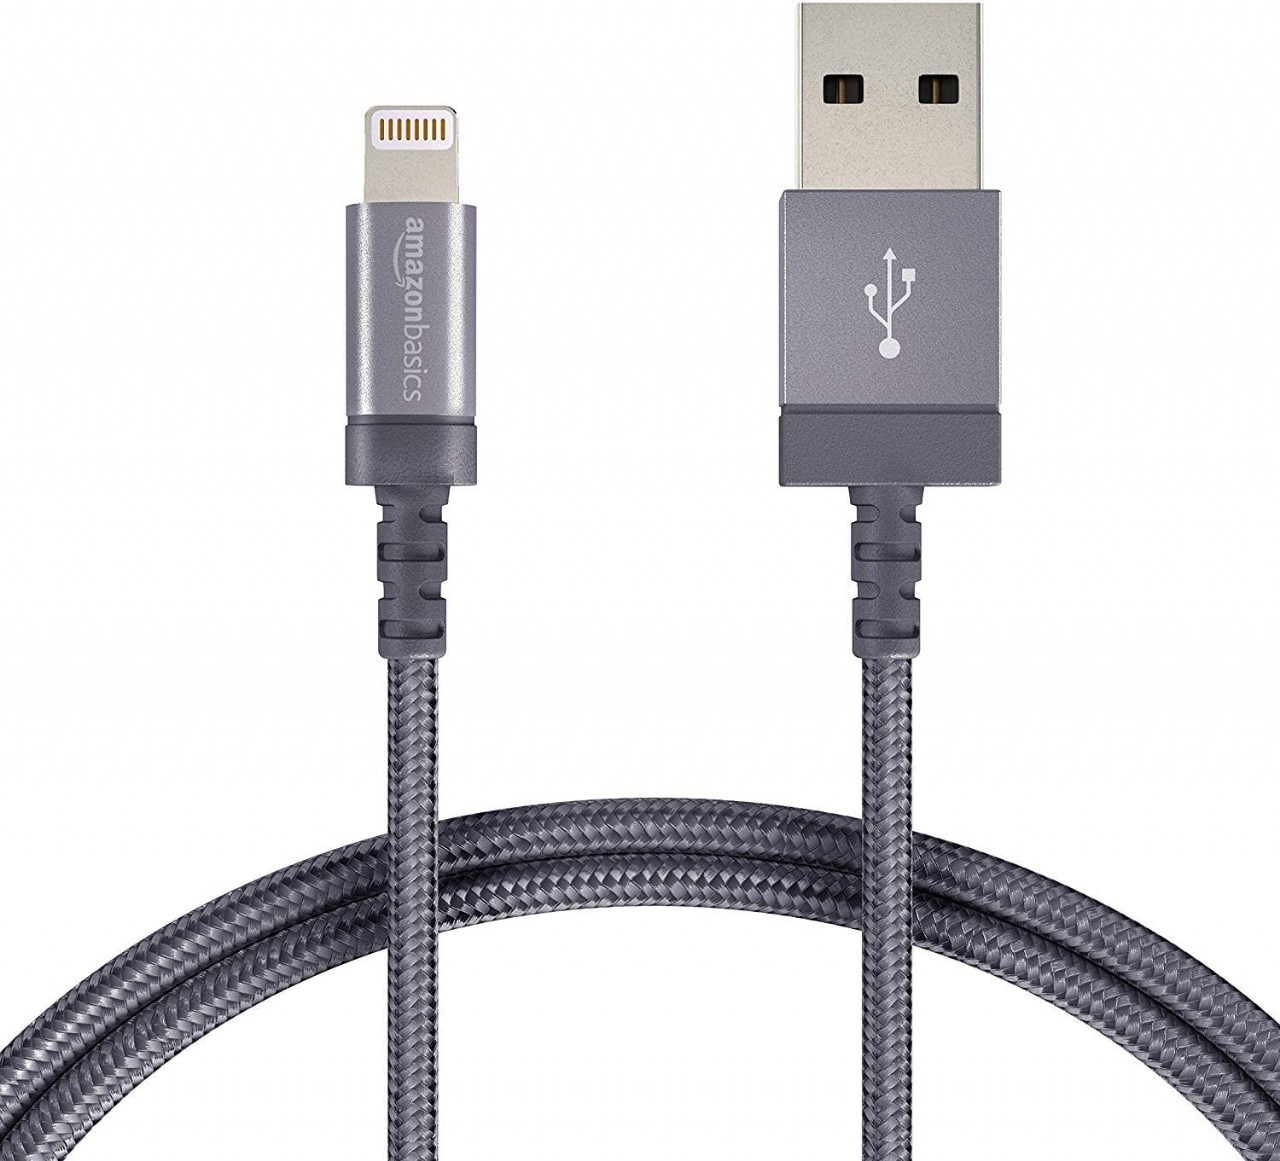 AmazonBasics Nylon Braided Lightning to USB A Cable, MFi Certified iPhone Charger, Dark Gray, 6-Foot